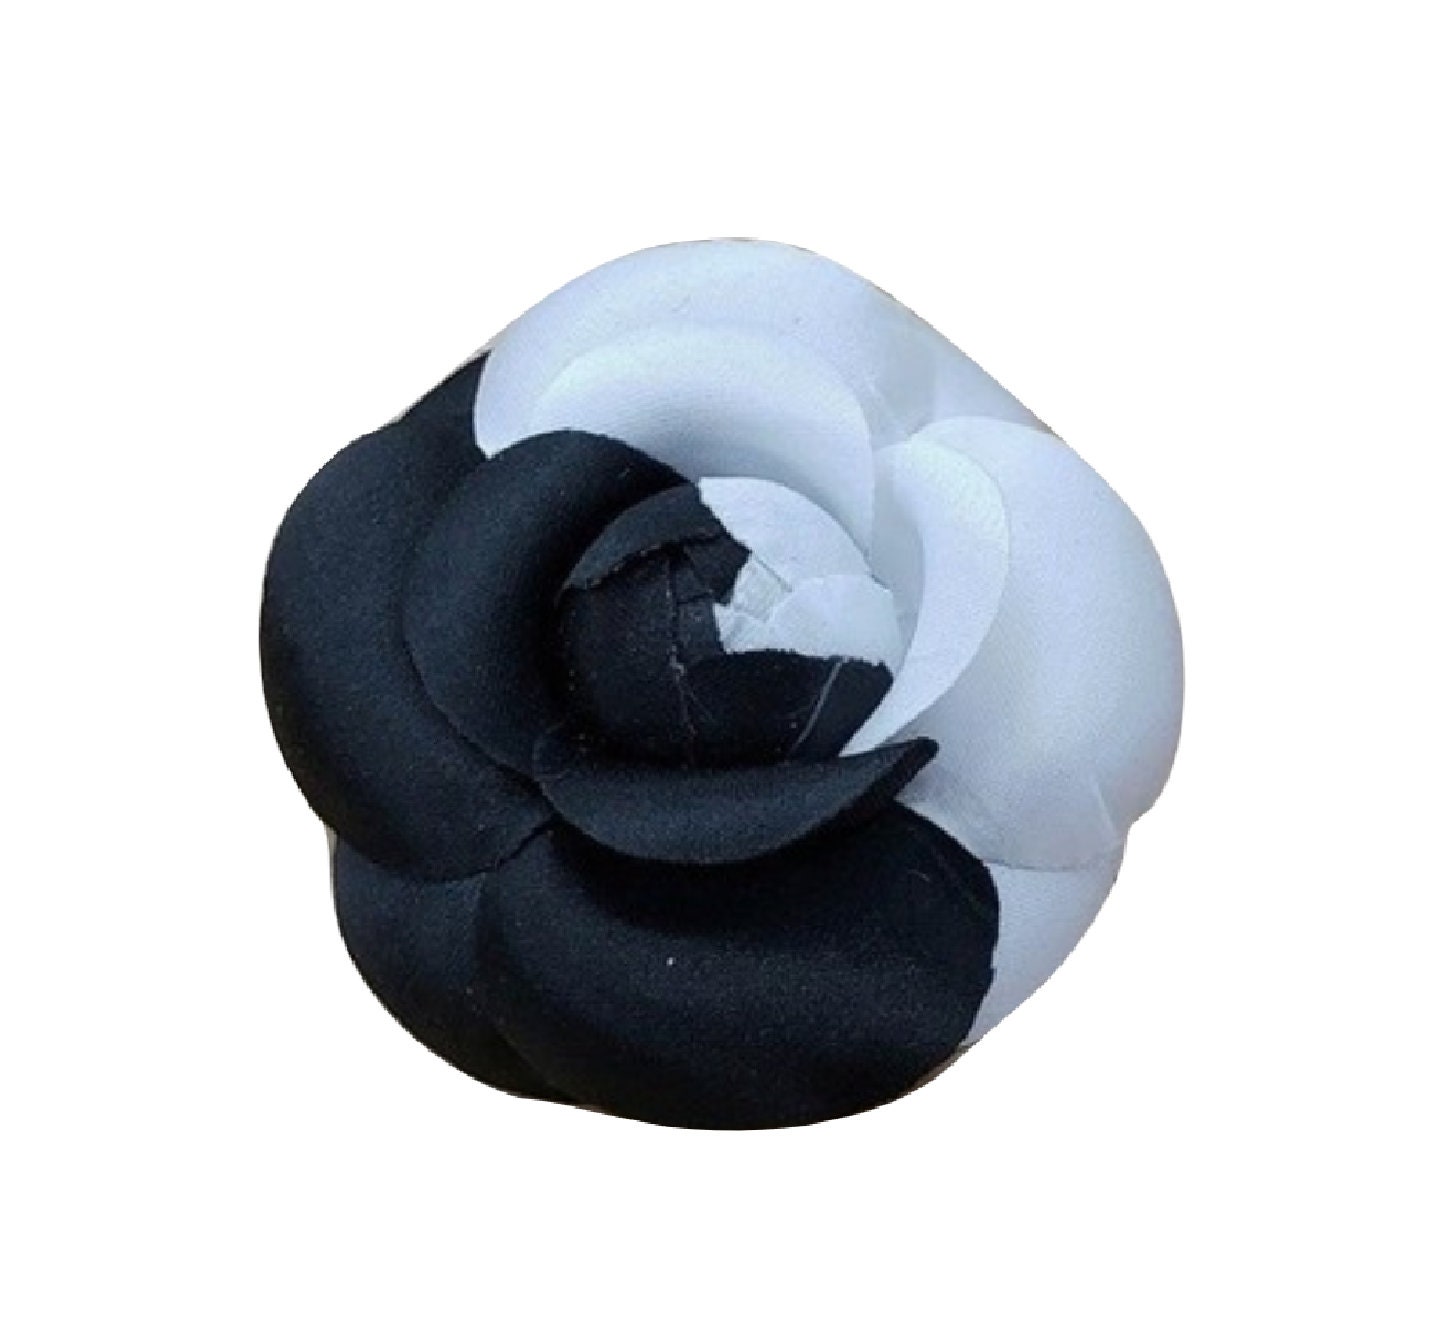  M&S Schmalberg Camellia Silk Fabric Flower Pin Brooch Flower.  Red Camellia Brooch Pin - Hand-made in New York's Garment Center (American  Made) : Clothing, Shoes & Jewelry